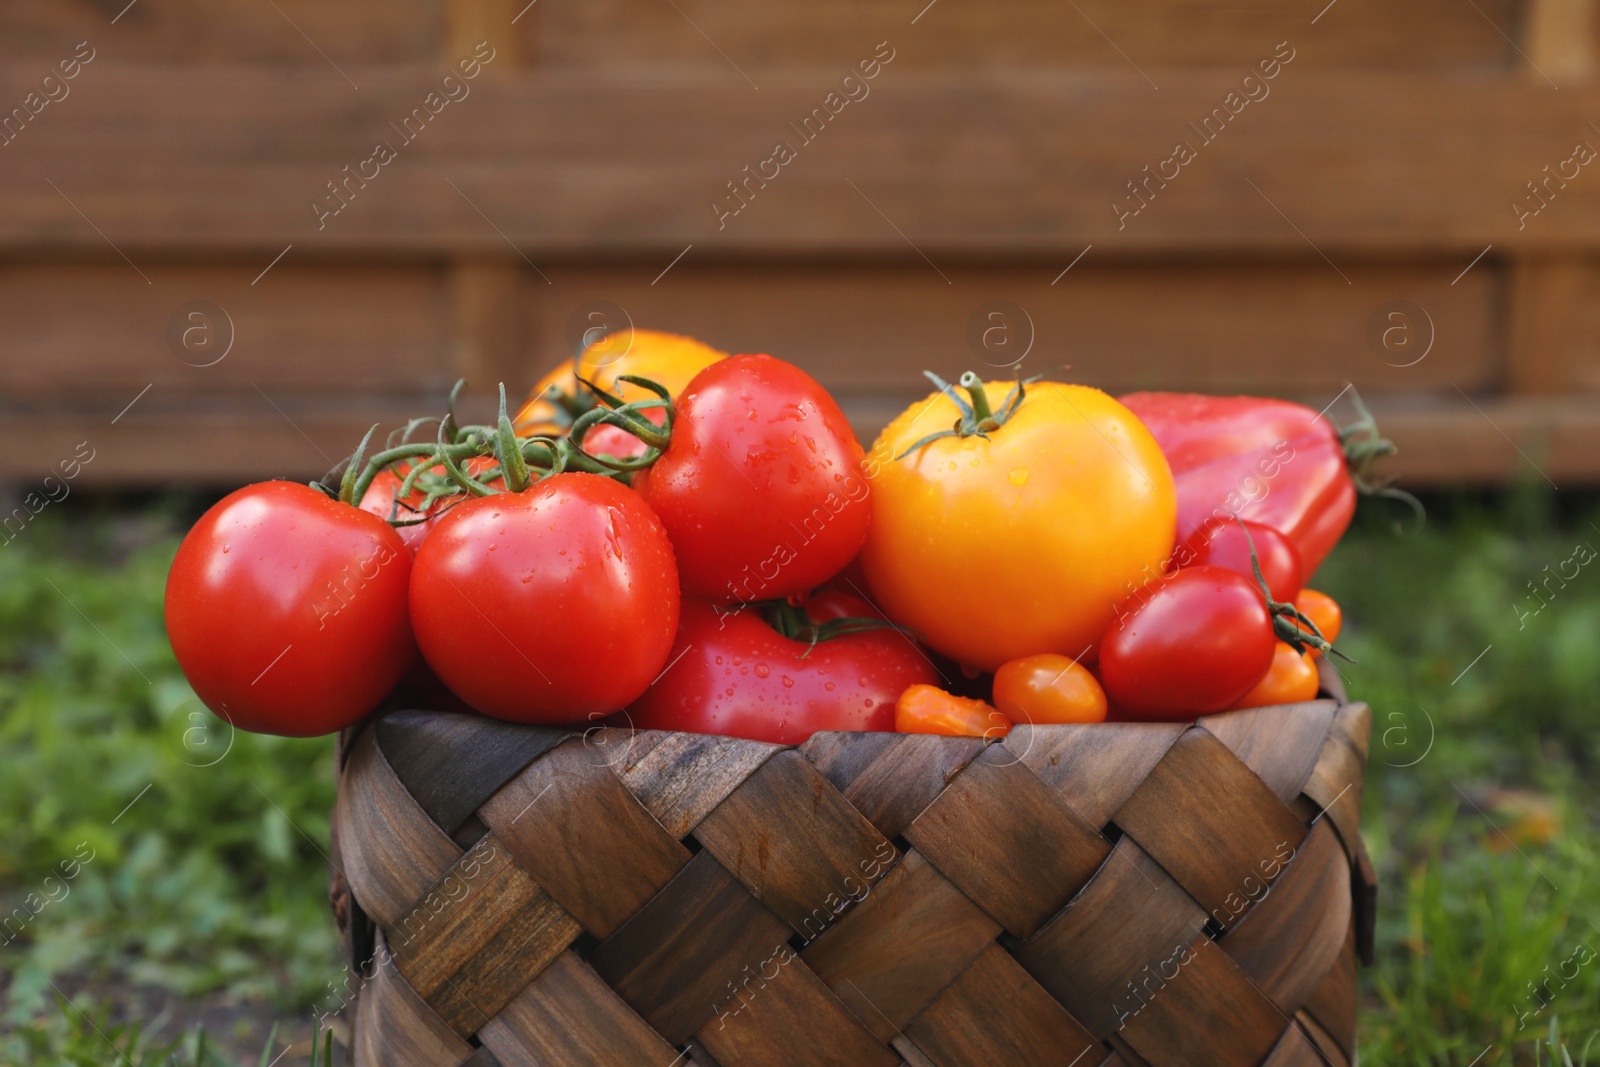 Photo of Basket with fresh tomatoes on green grass outdoors